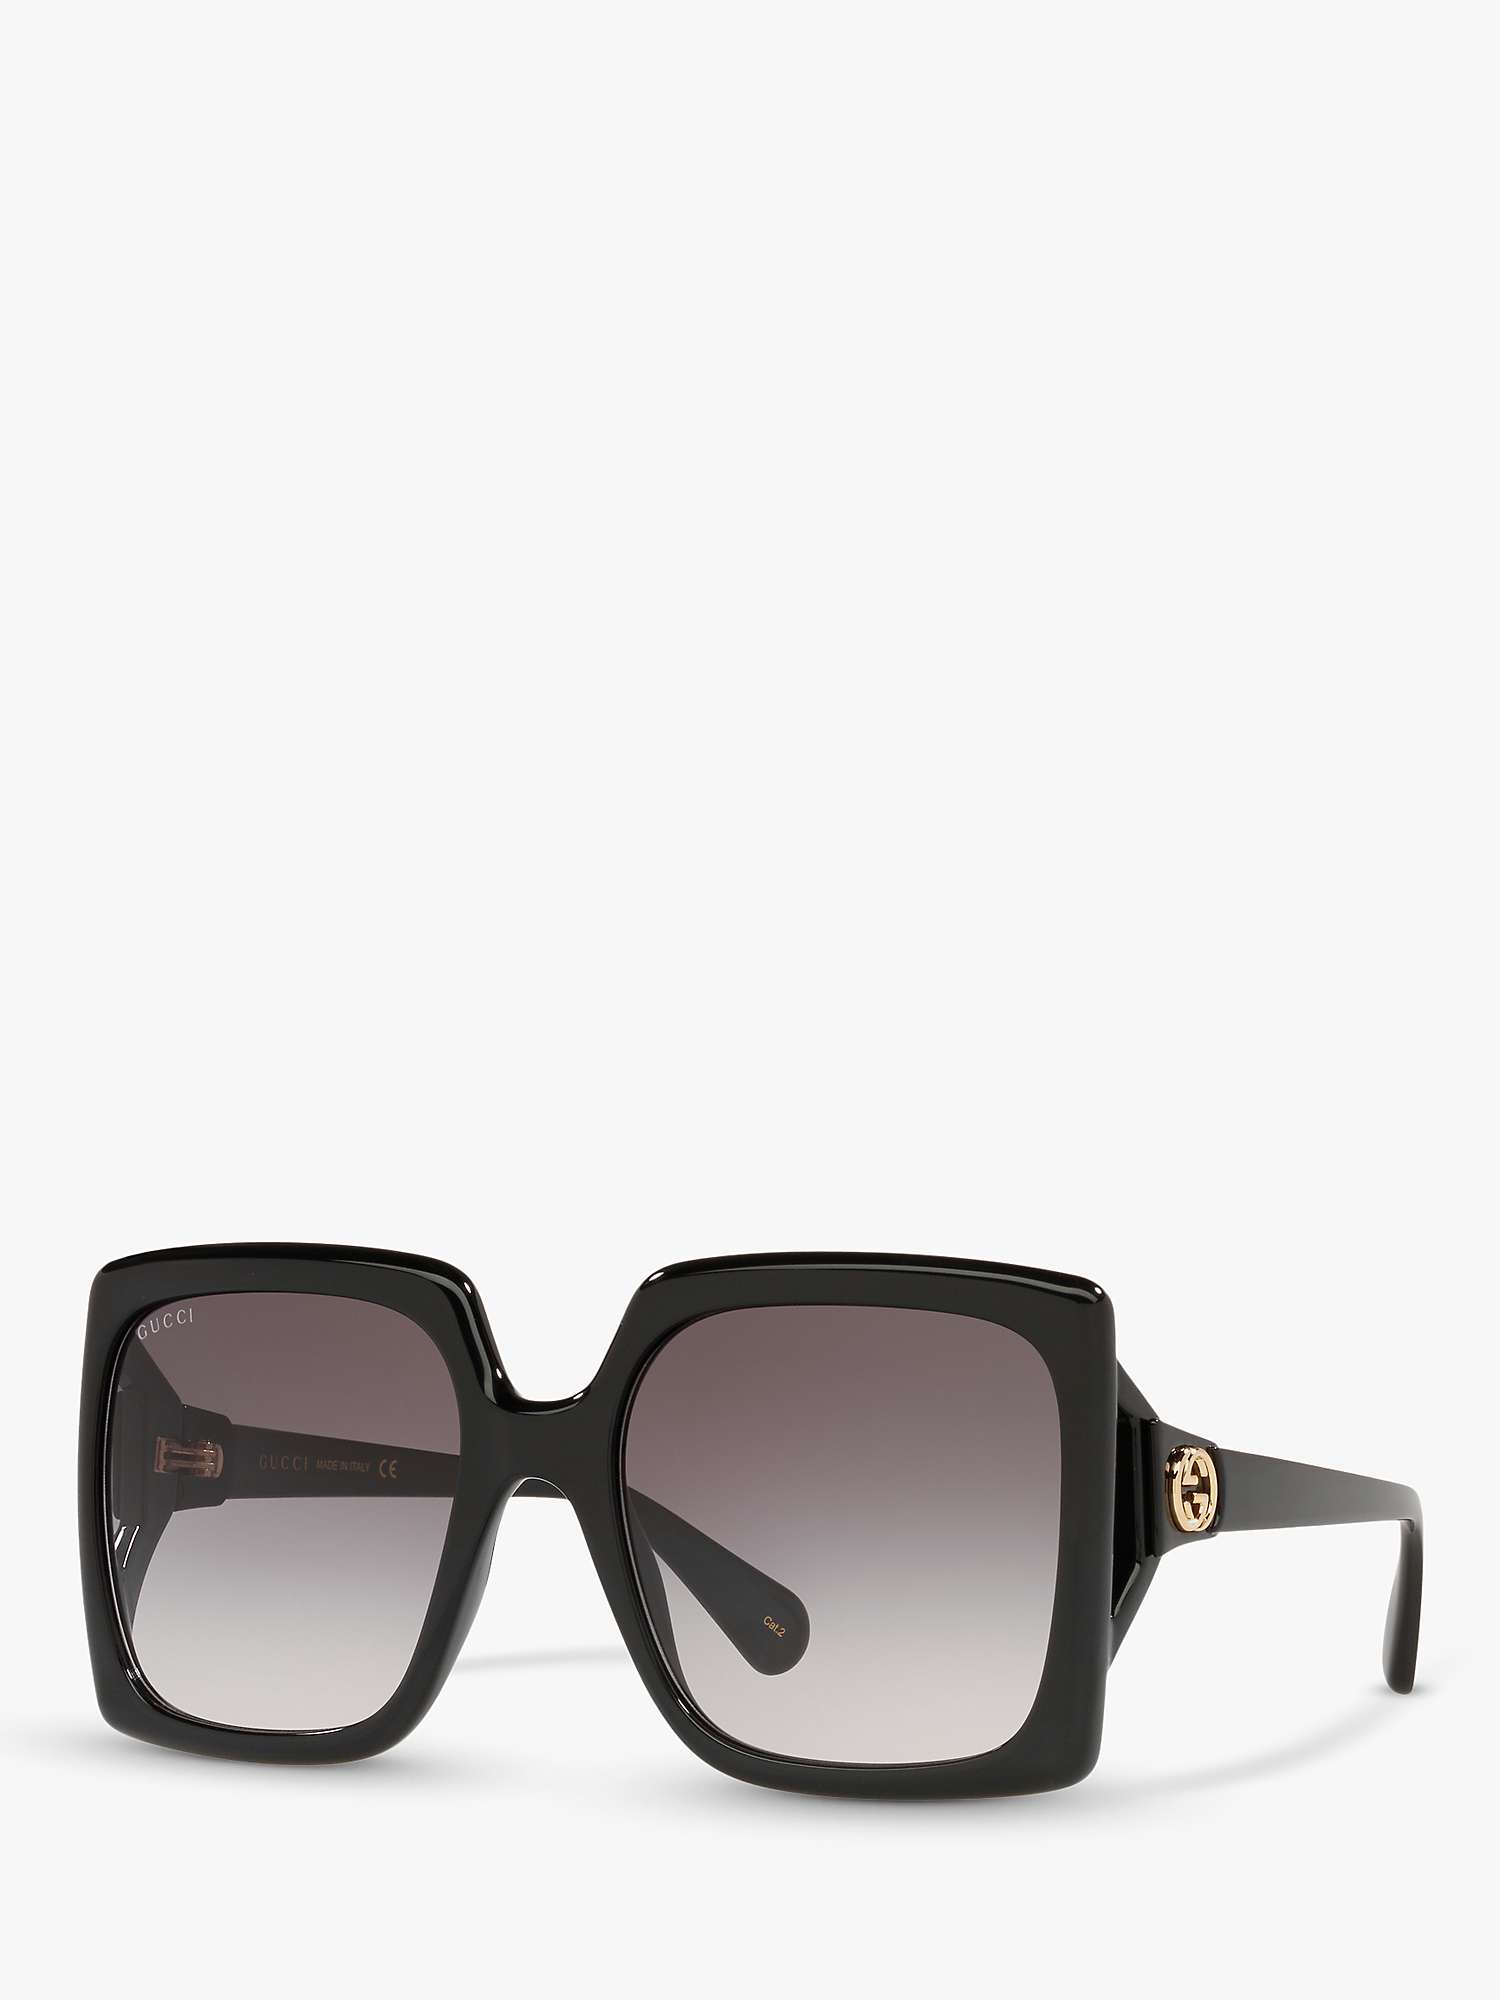 Buy Gucci GG0876S Women's Chunky Square Sunglasses Online at johnlewis.com